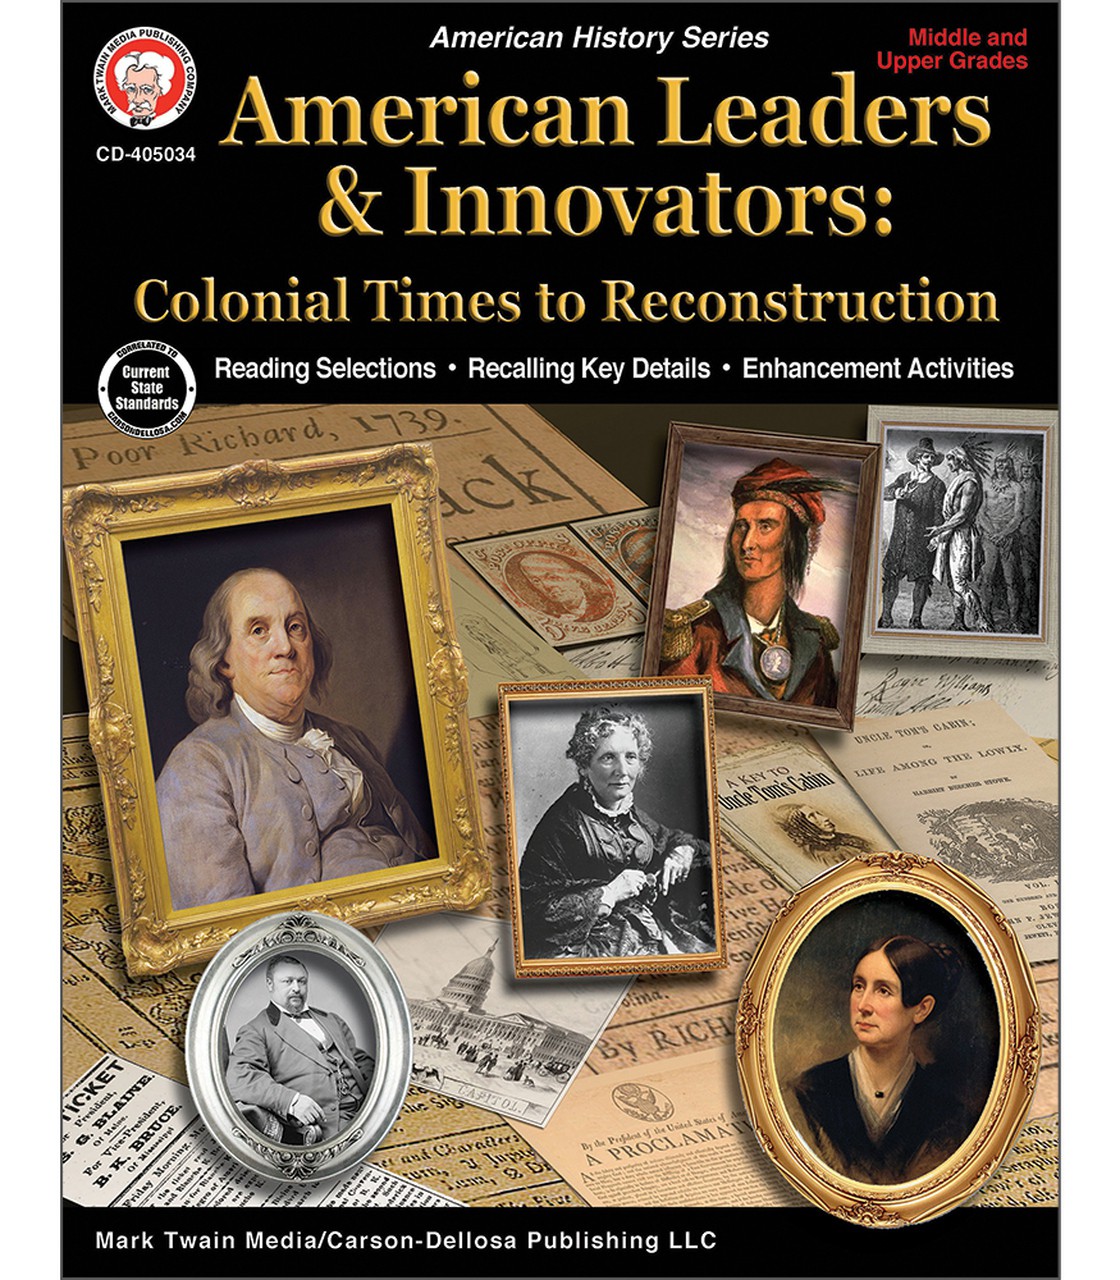 American Leaders & Innovators: Colonial Times to Reconstruction Workbook Grade 6-12 Paperback